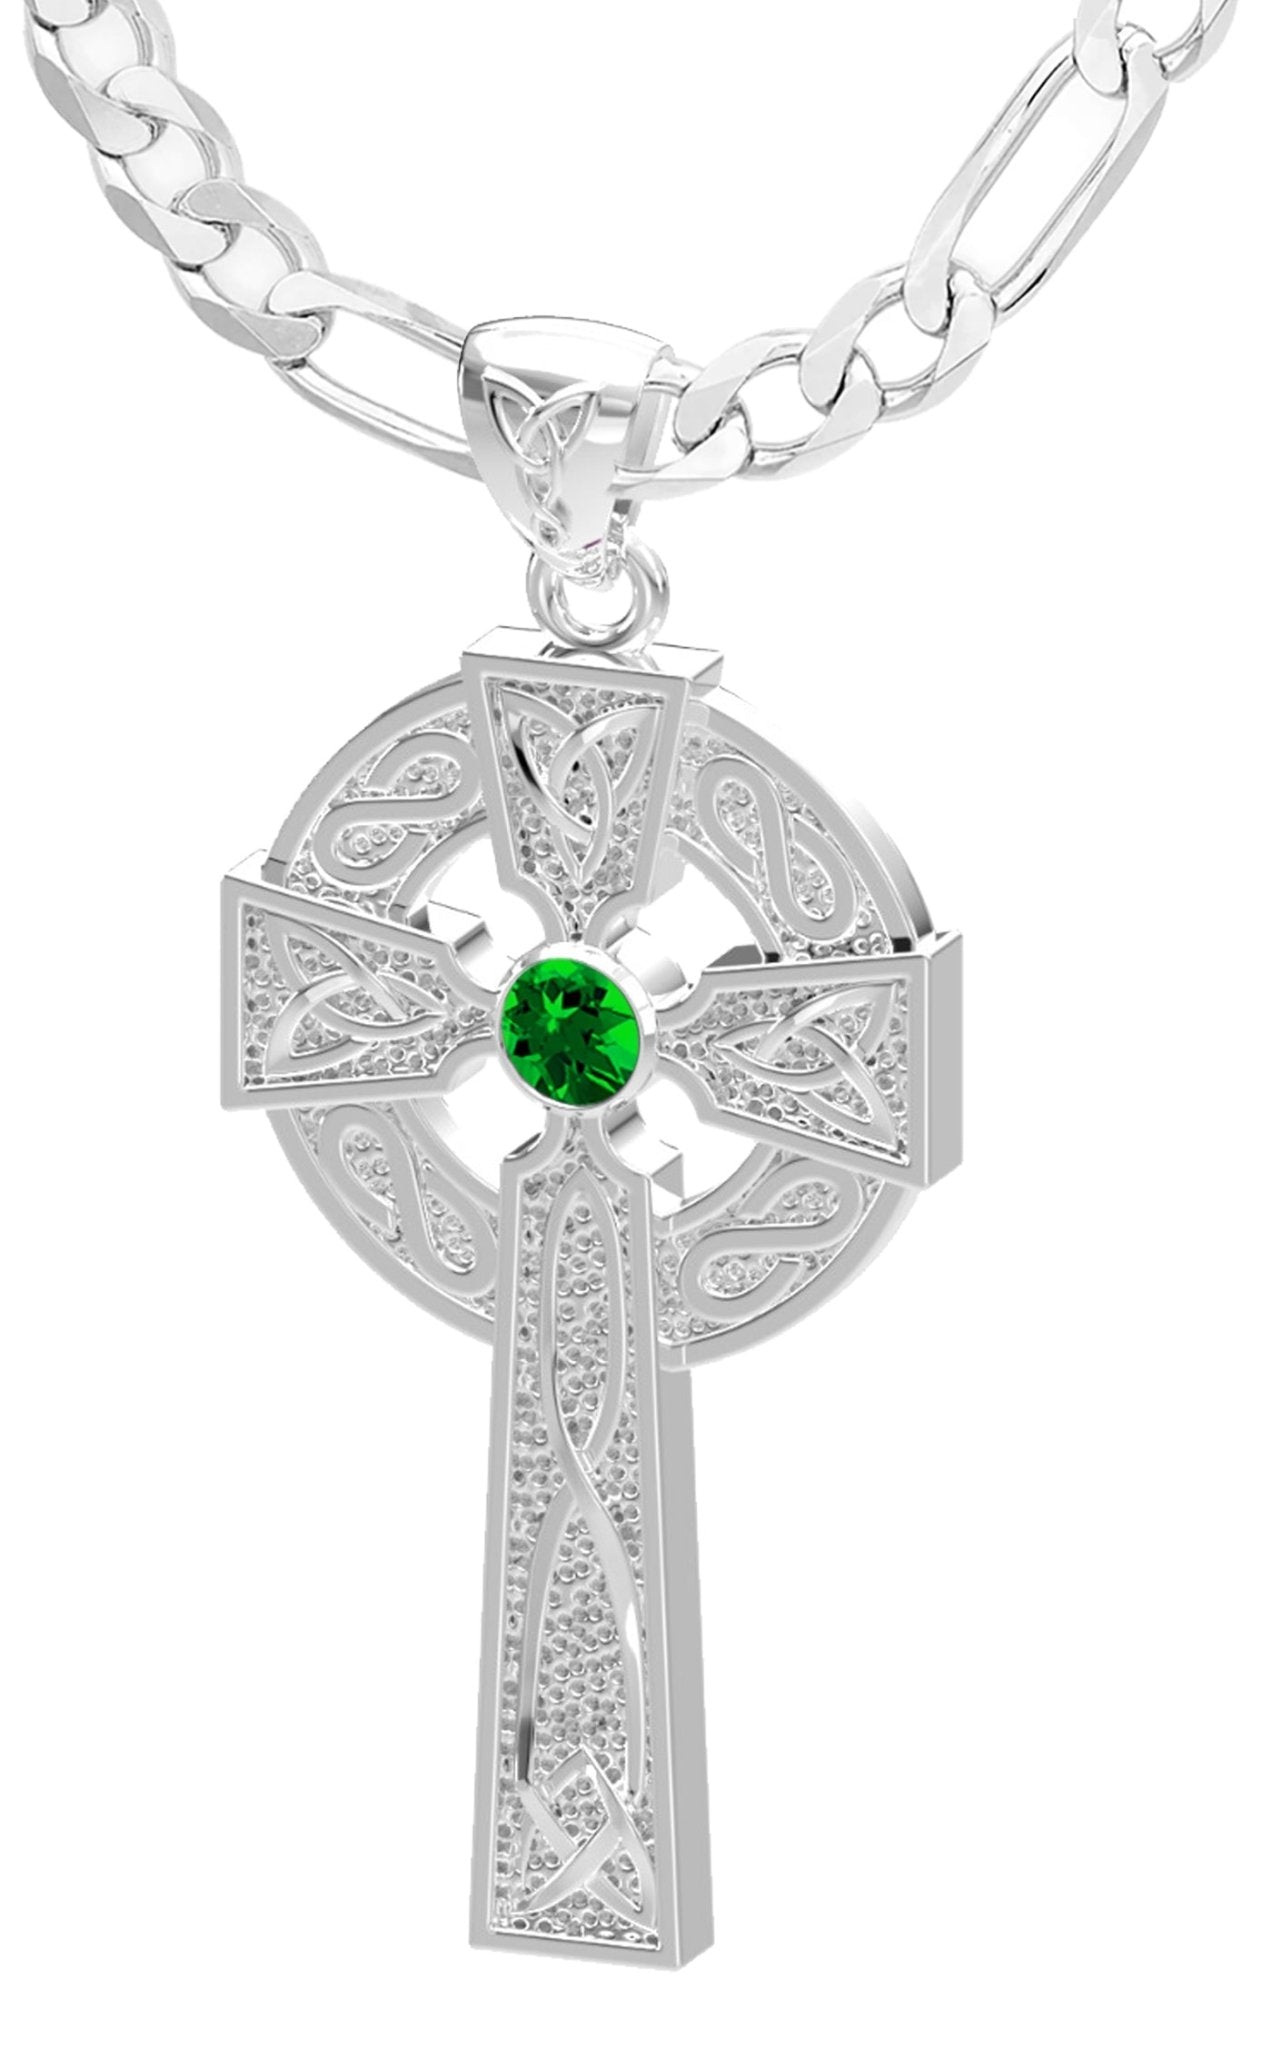 Celtic Cross Necklace - Pendant Necklace With Gemstones